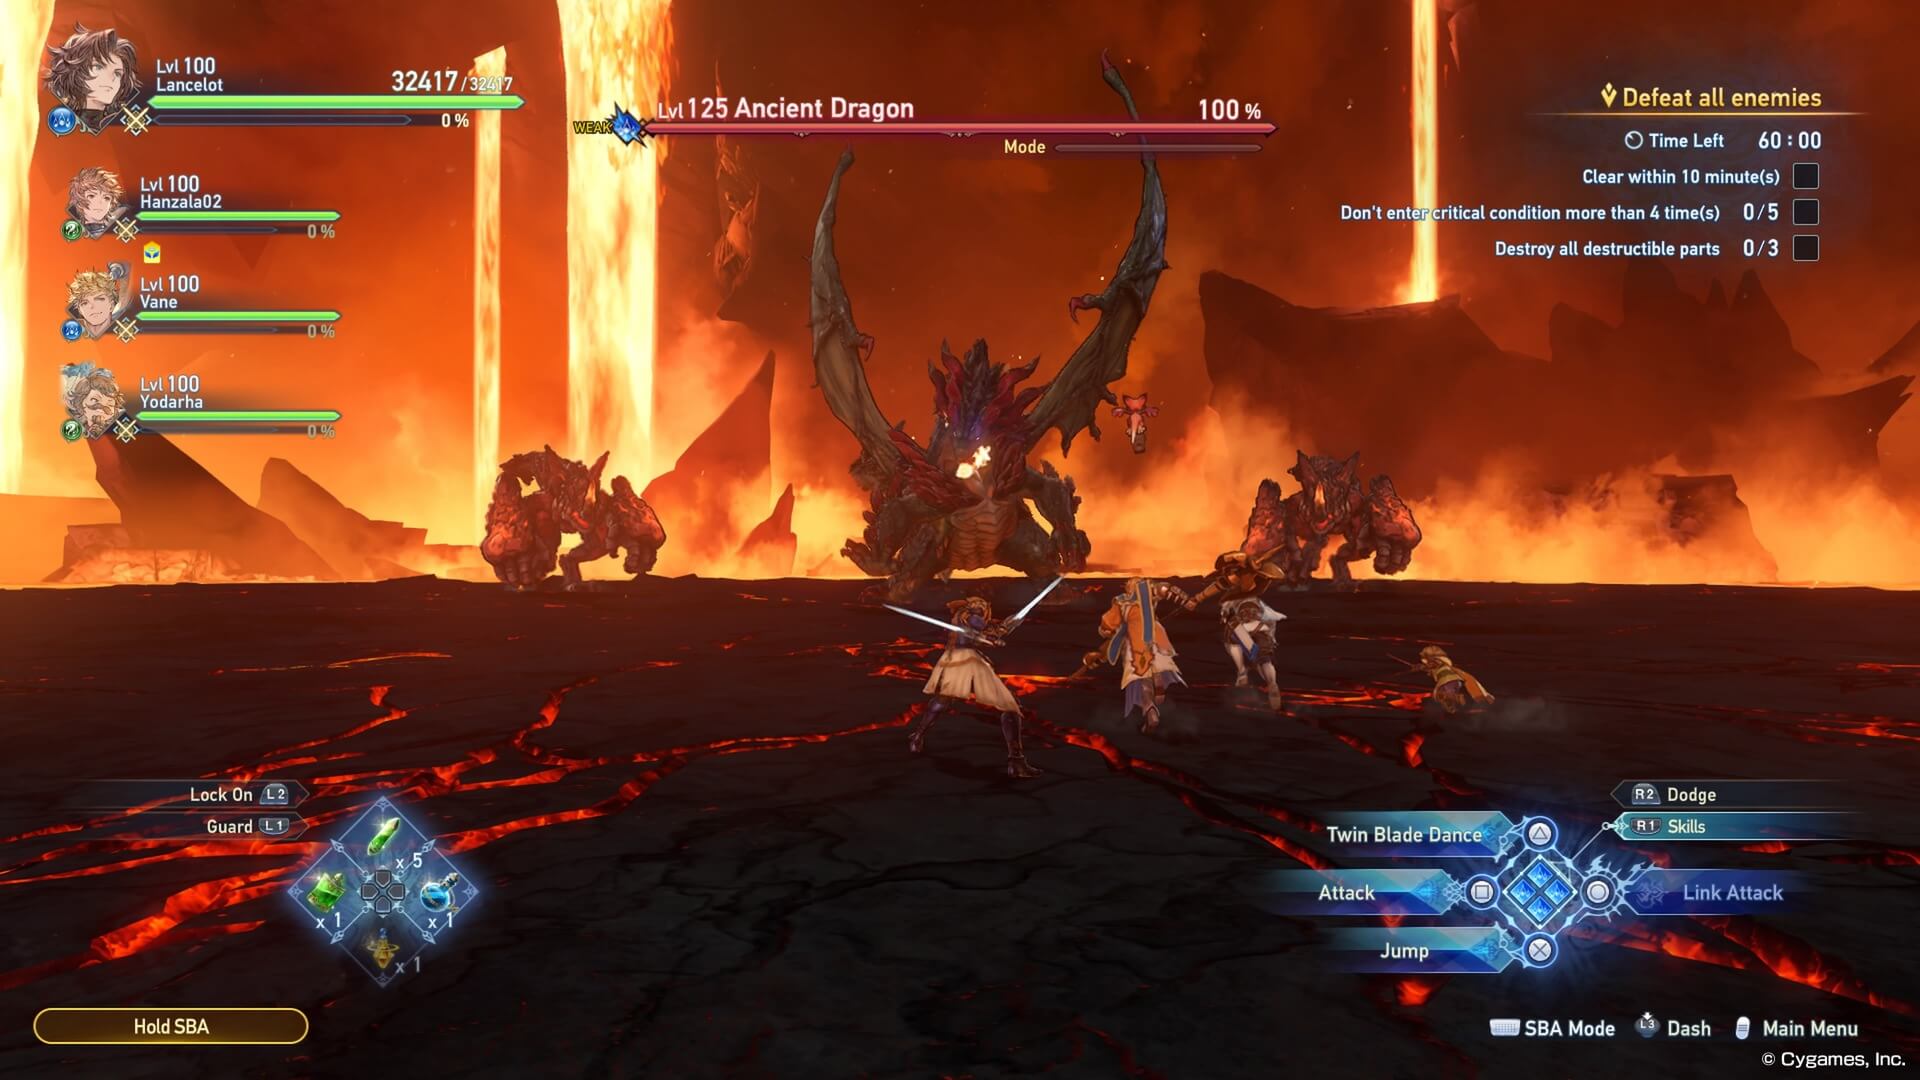 Fighting three bosses at once and dodging their attacks takes nerves of steel